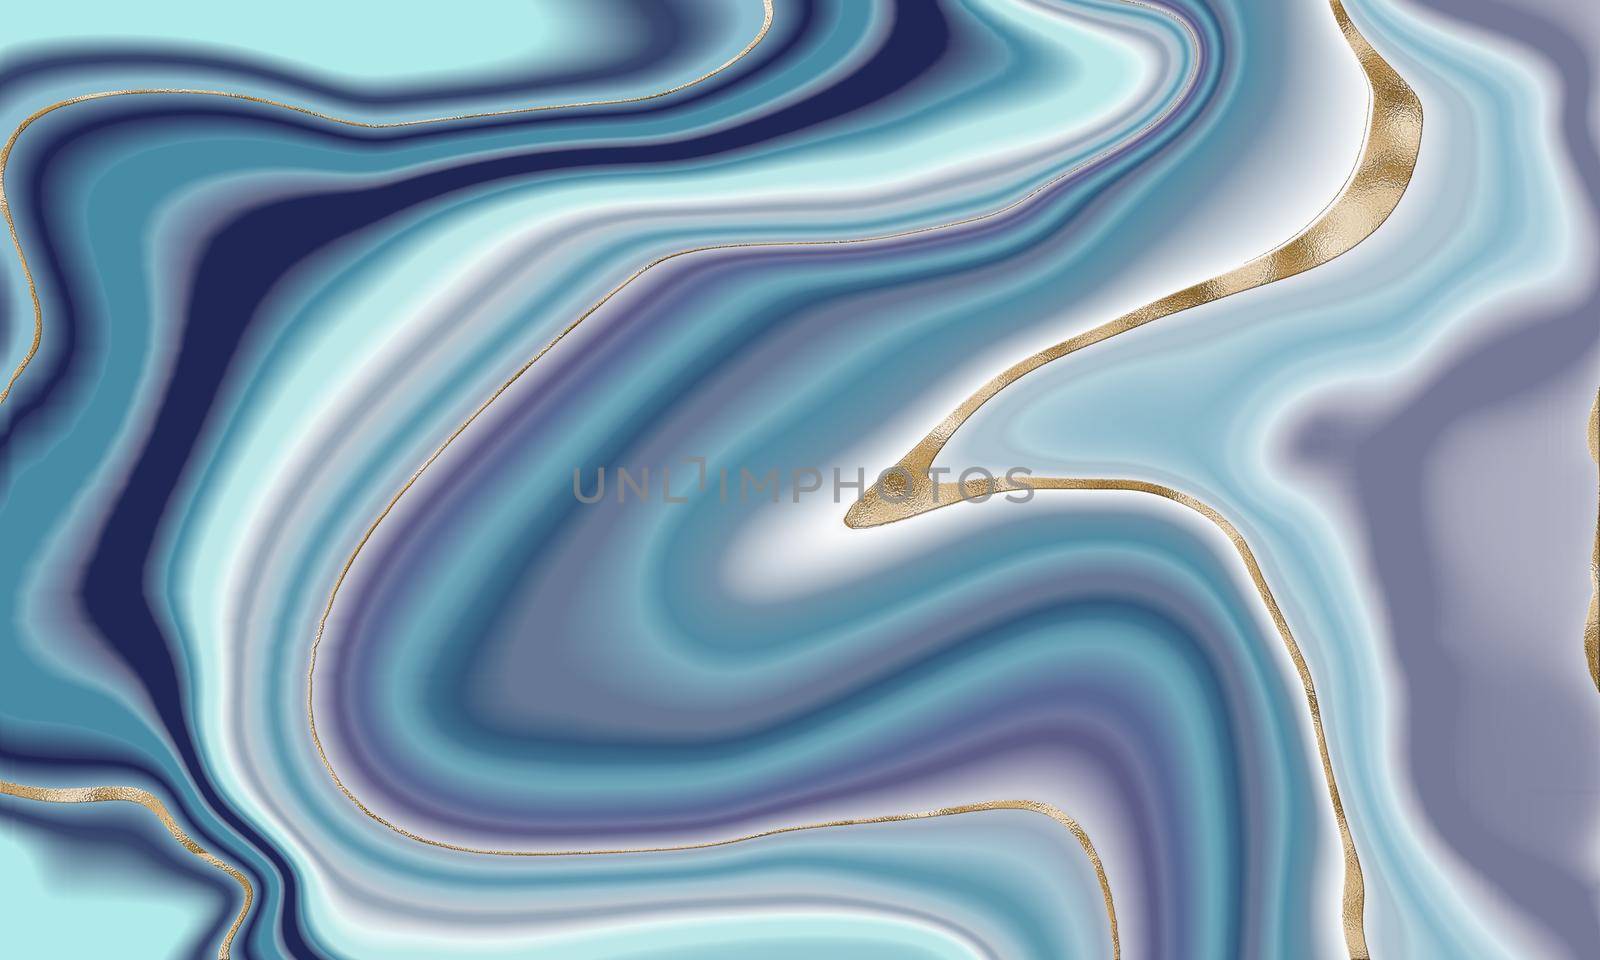 Marbling abstract background in blue with gold. Curved liquid shapes with gold vein. Illustration